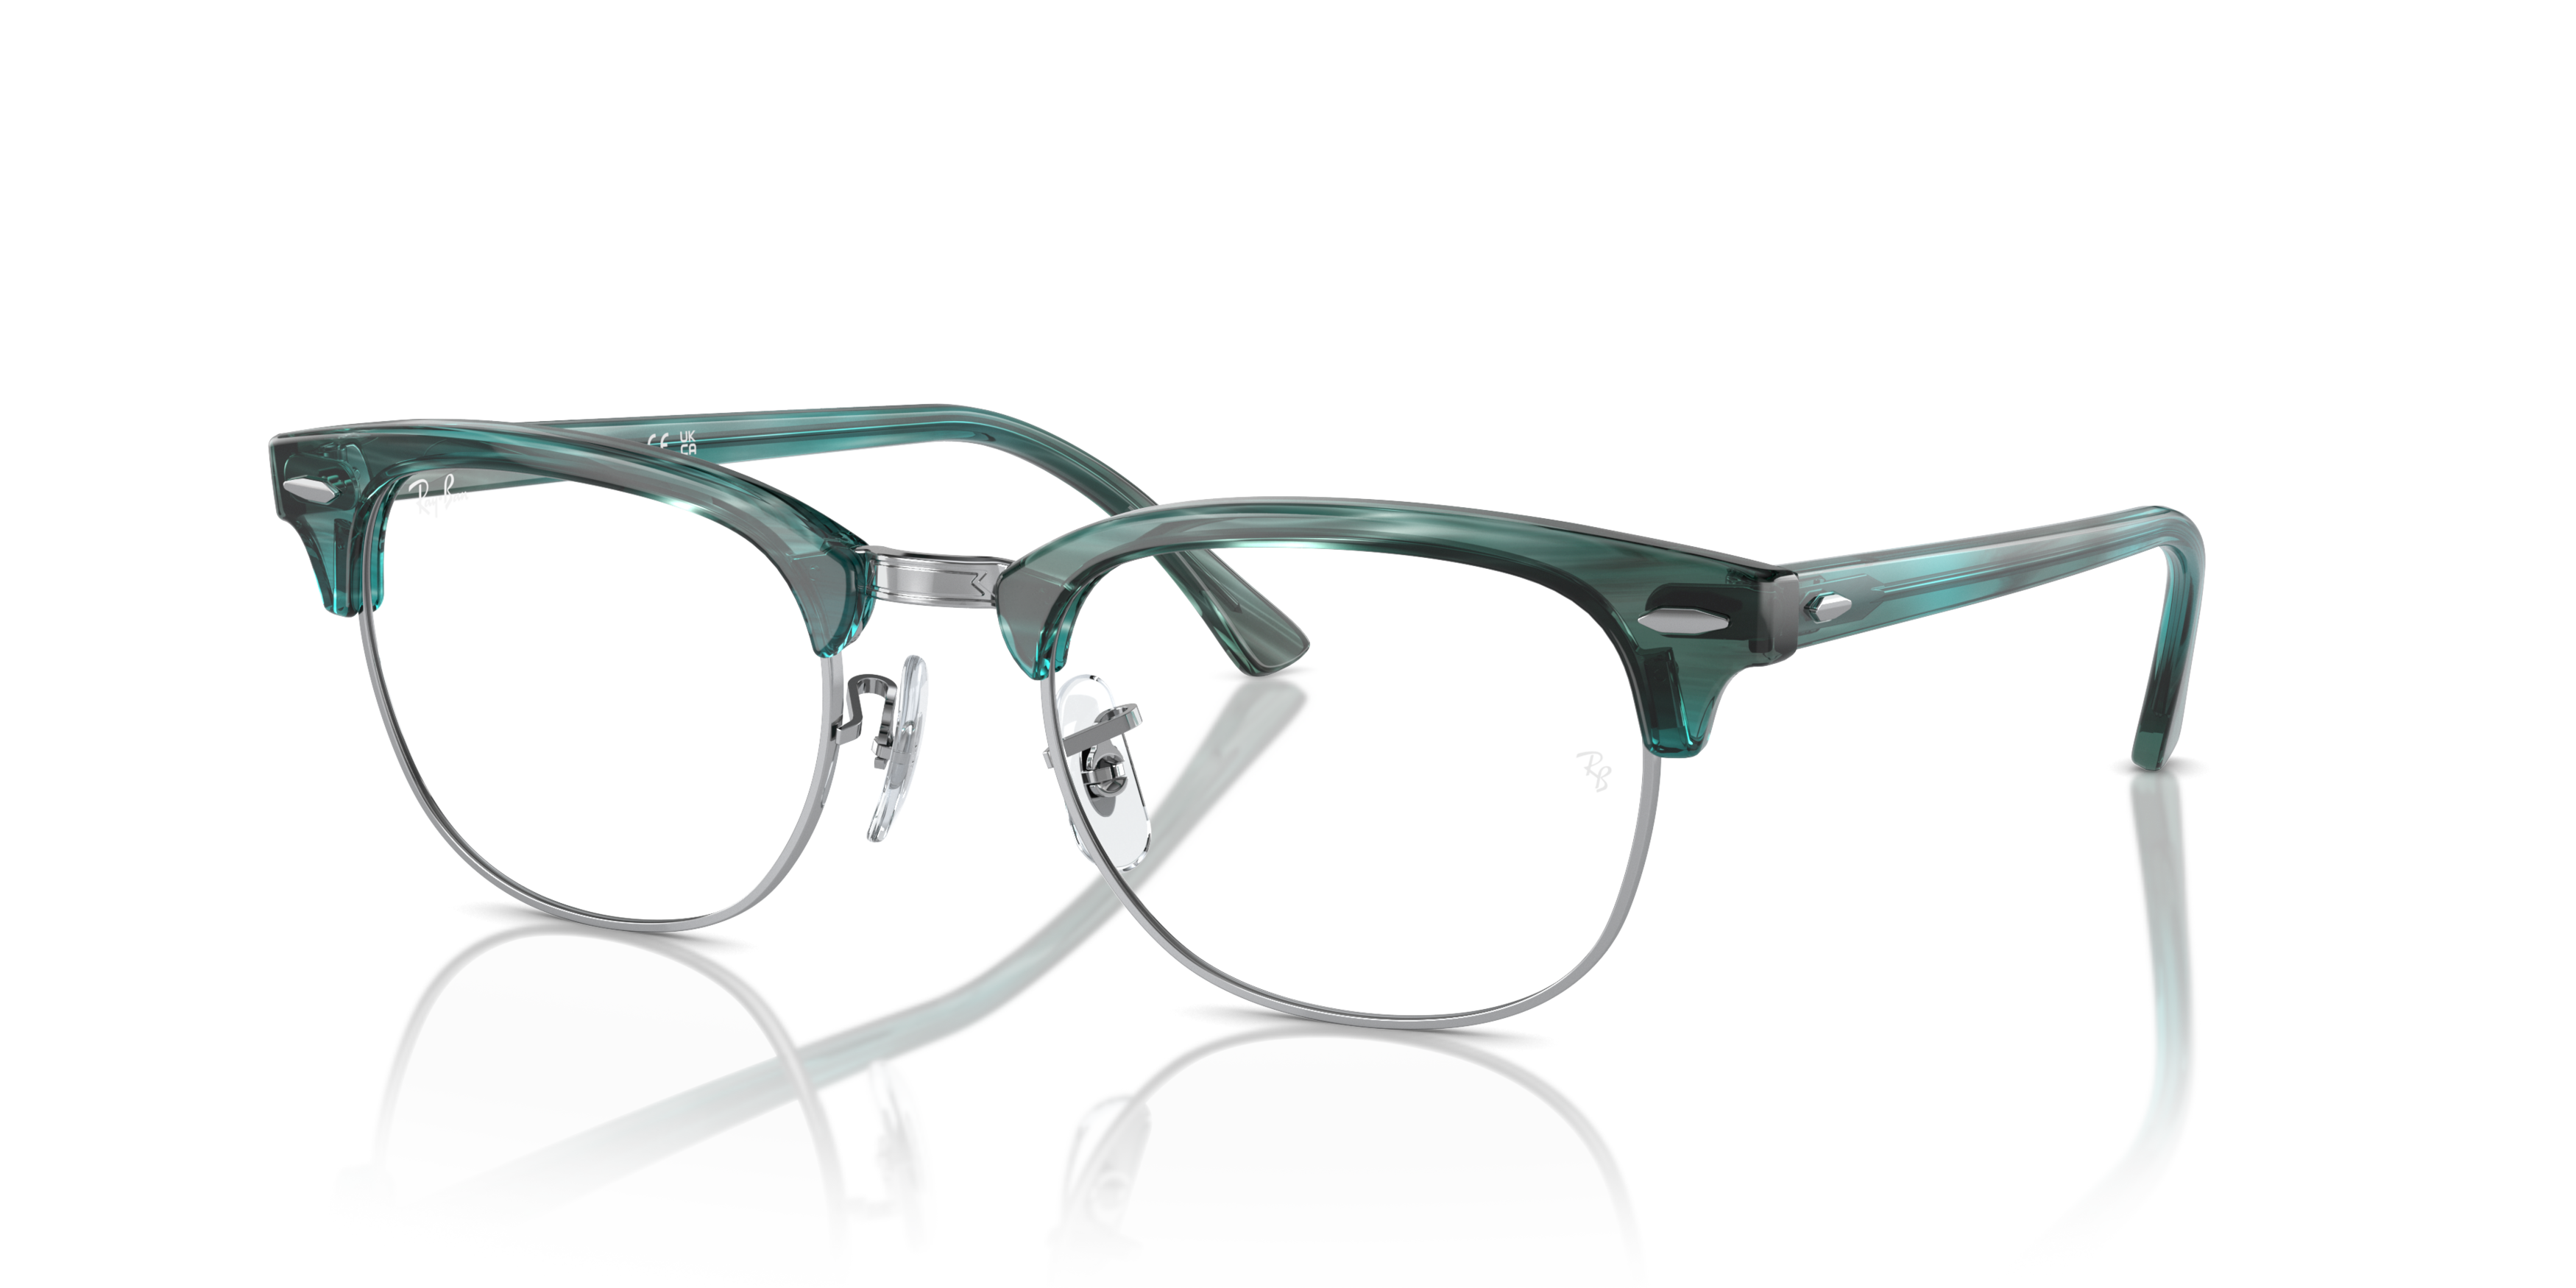 Angle_Left01 Ray-Ban LEGACY RX5154 8377 Groen, Zilver